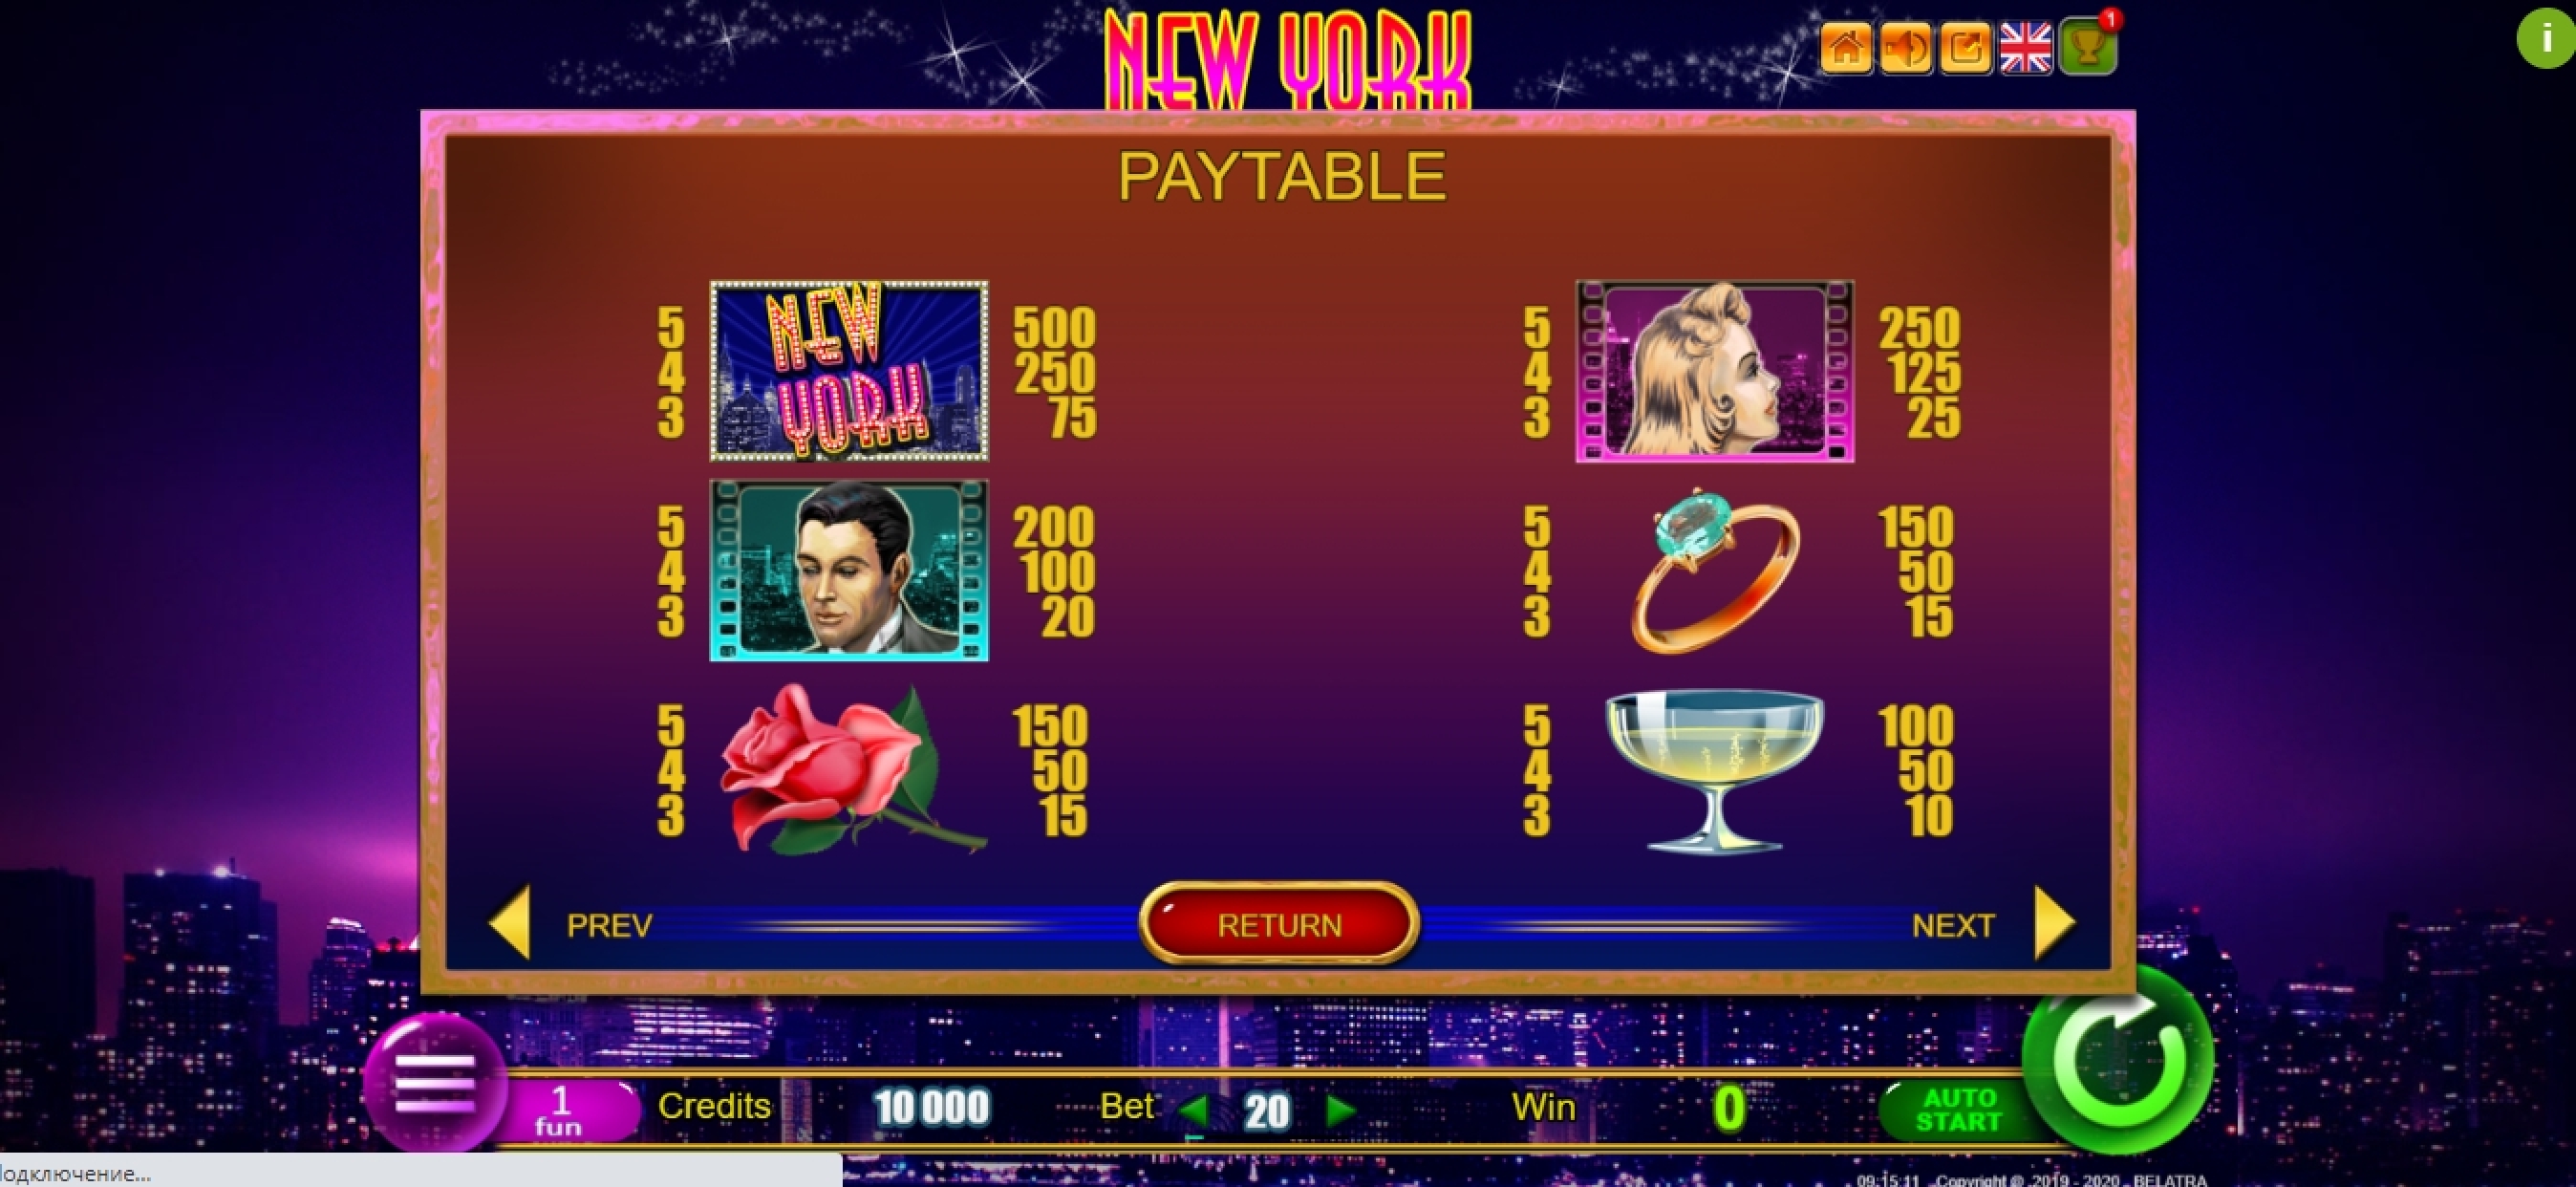 Info of New York Slot Game by Belatra Games